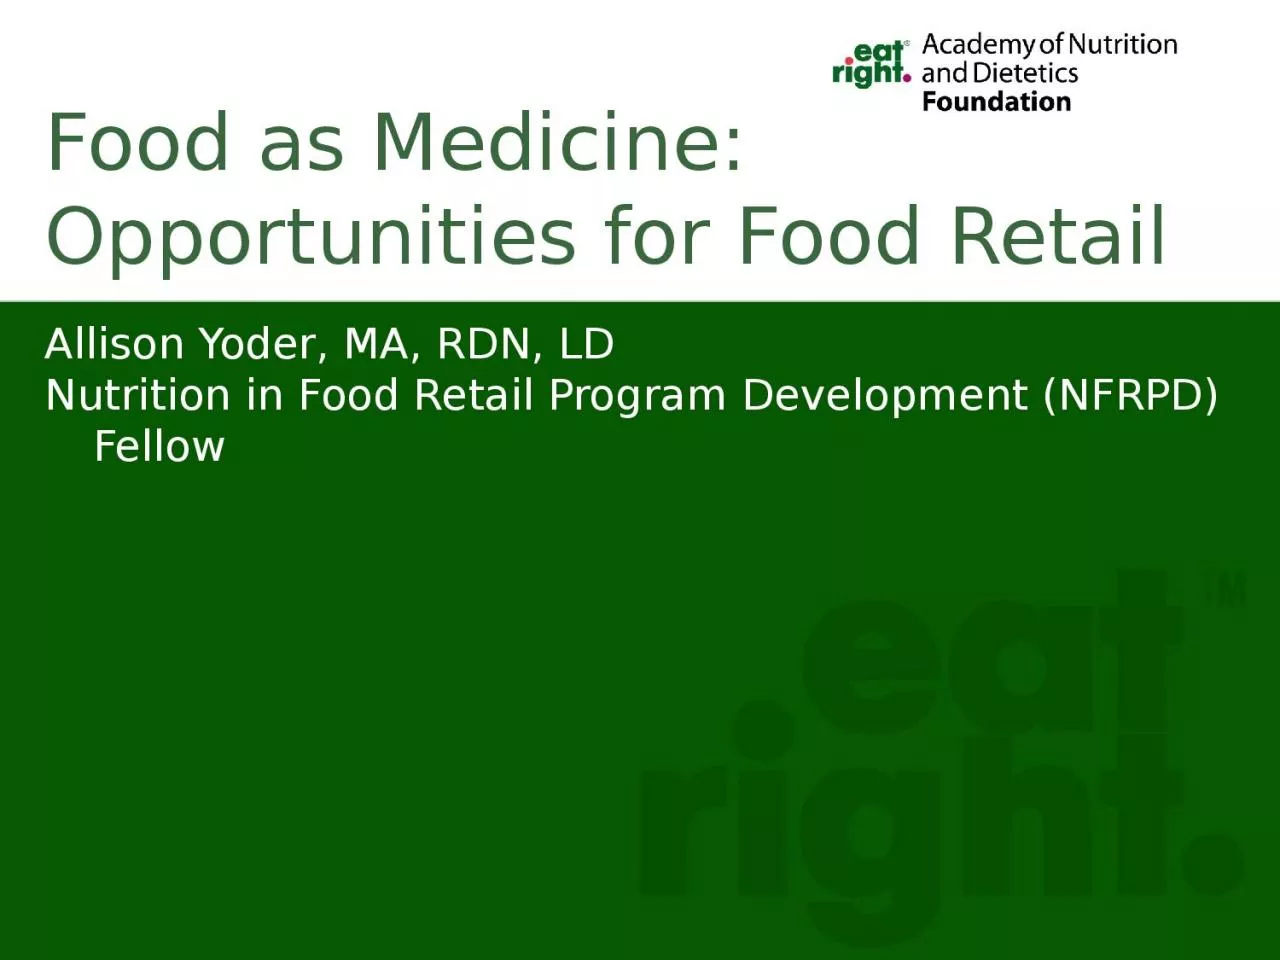 Food as Medicine: Opportunities for Food Retail